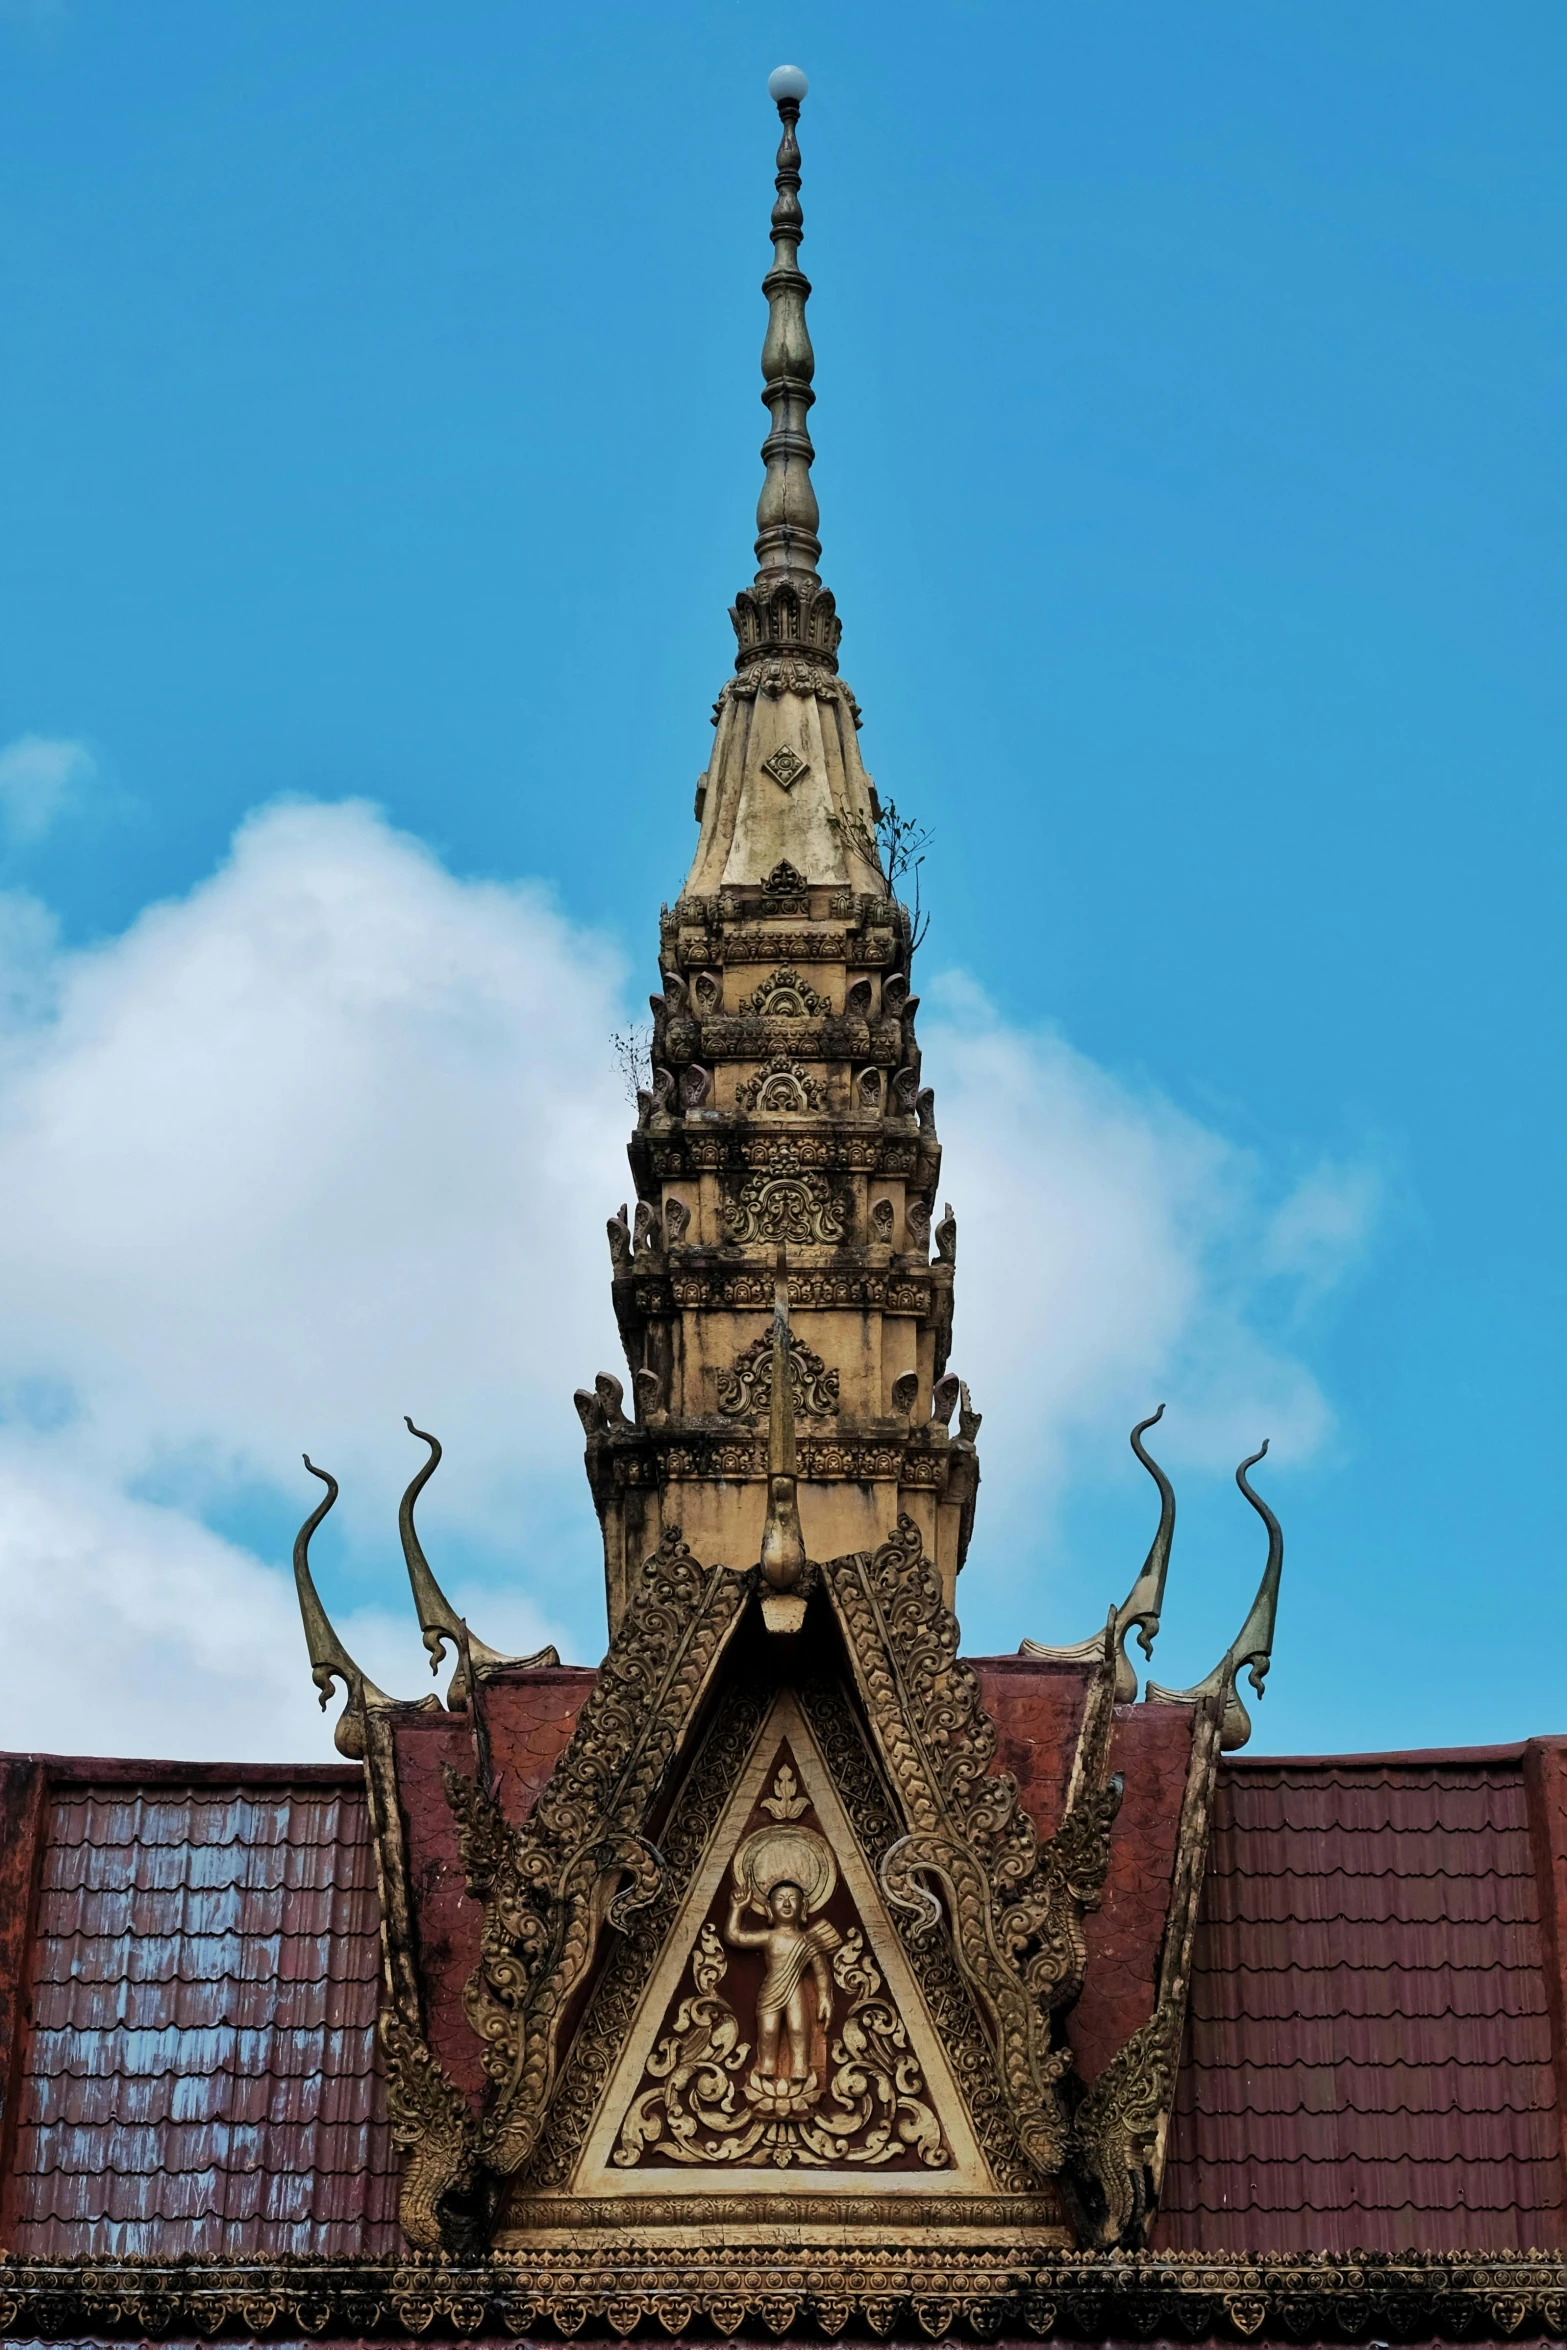 ornate sculptures and statues surrounding an ancient architecture